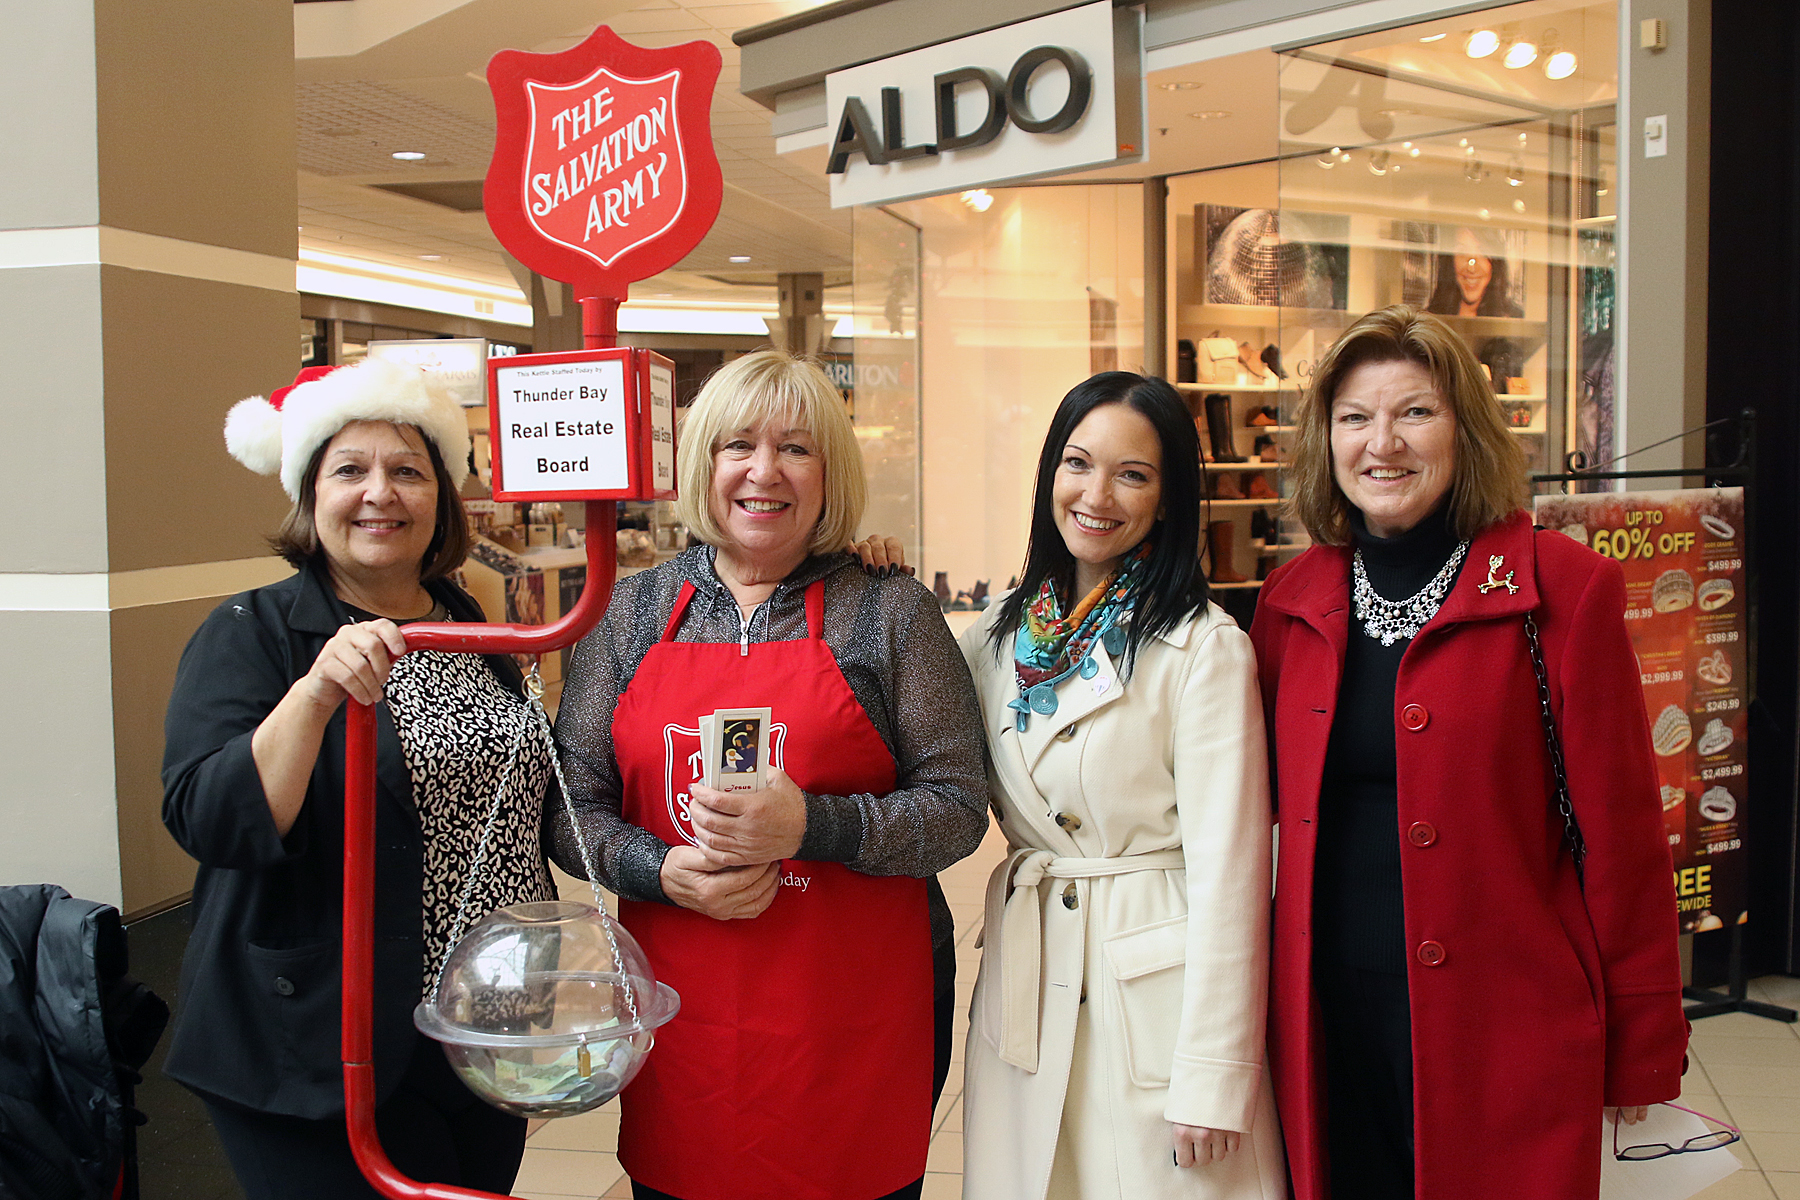 https://www.vmcdn.ca/f/files/tbnewswatch/images/local-news/2017/november/salvation-army-kettle-campaign/salvation-army-christmas-kettle-campaign.jpg